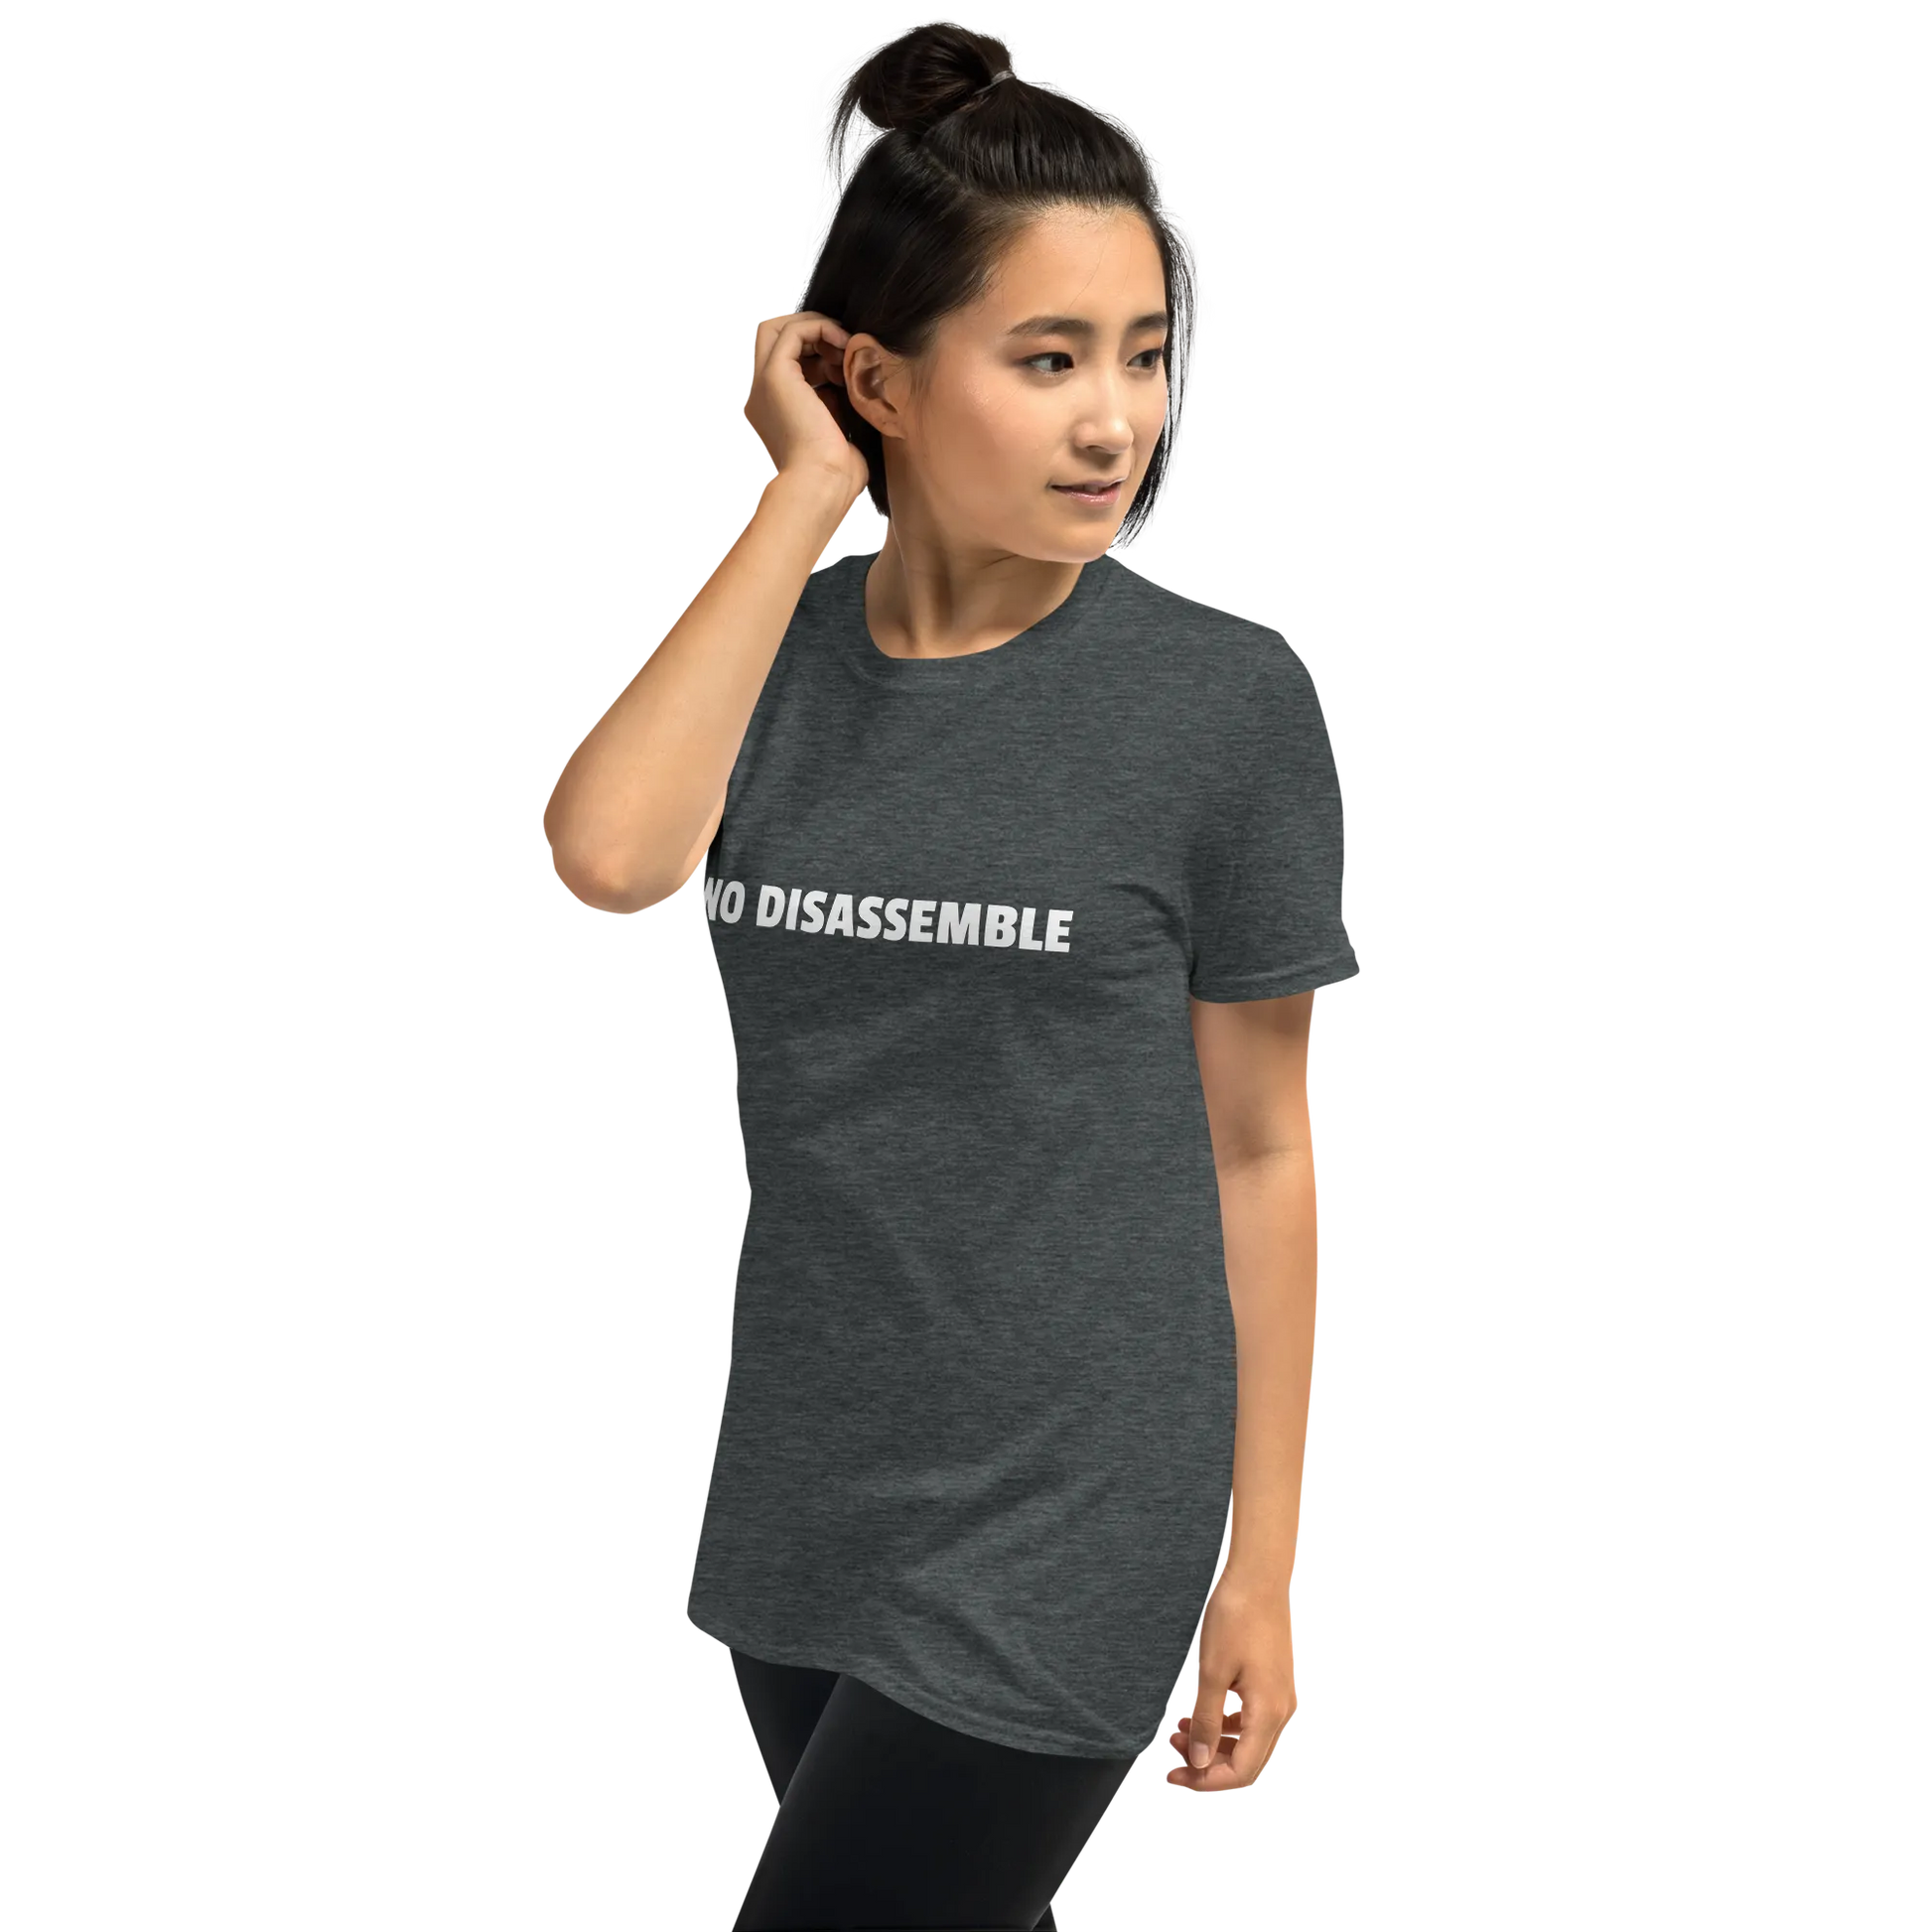 No Disassemble Tee in Dark Heather Grey on woman left